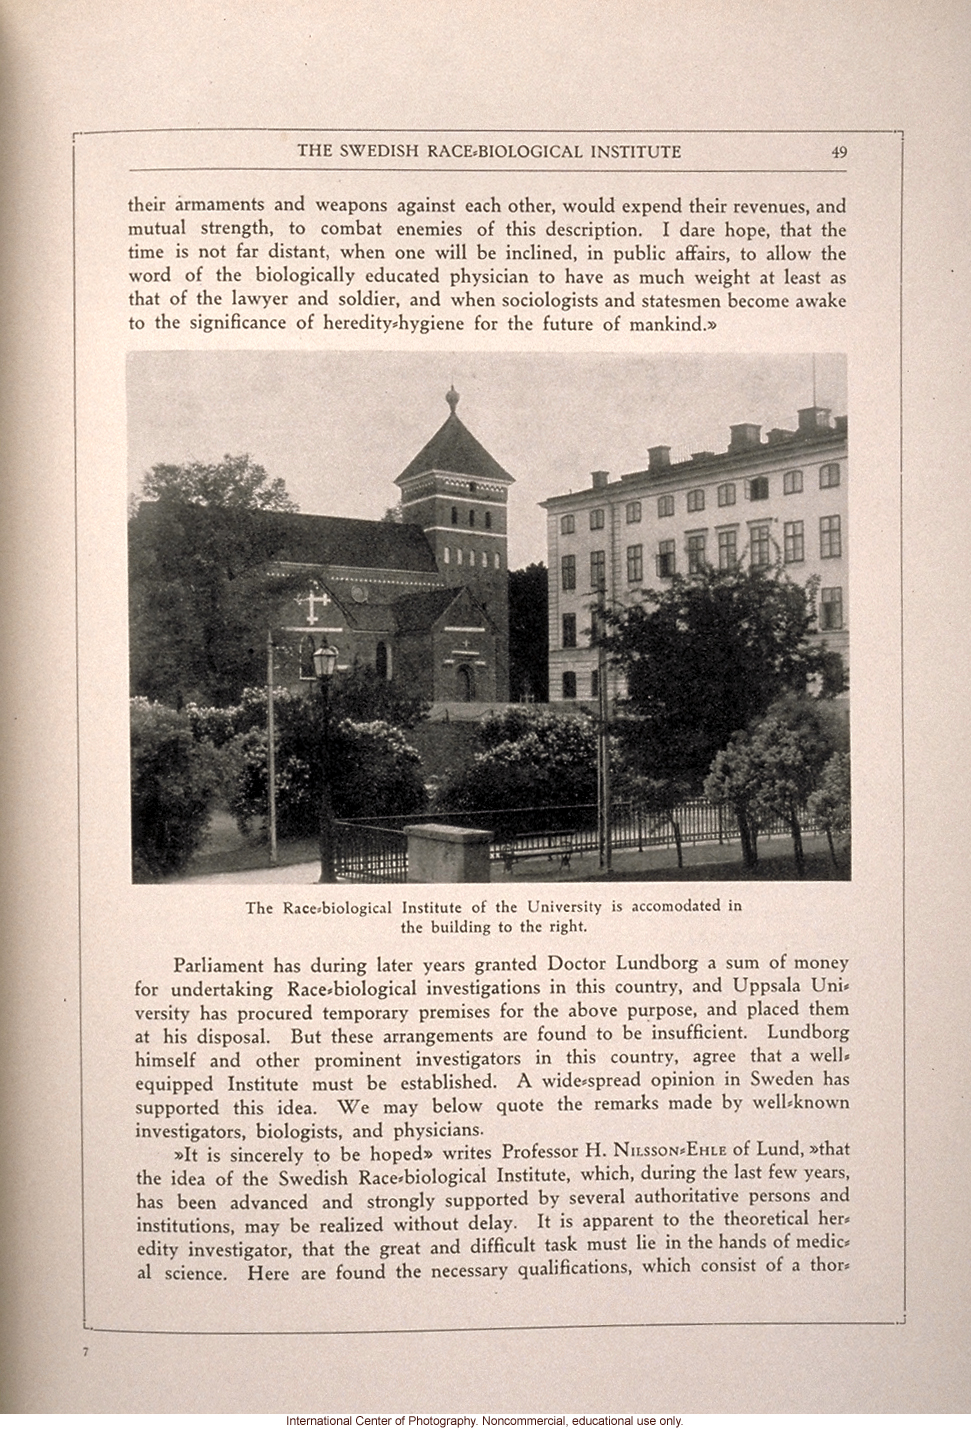 <i>The Swedish Nation</i>, &quote;The Swedish State-Institute for Race-Biological Investigation: An Account of its Origin&quote; by Hjalmar Anderson